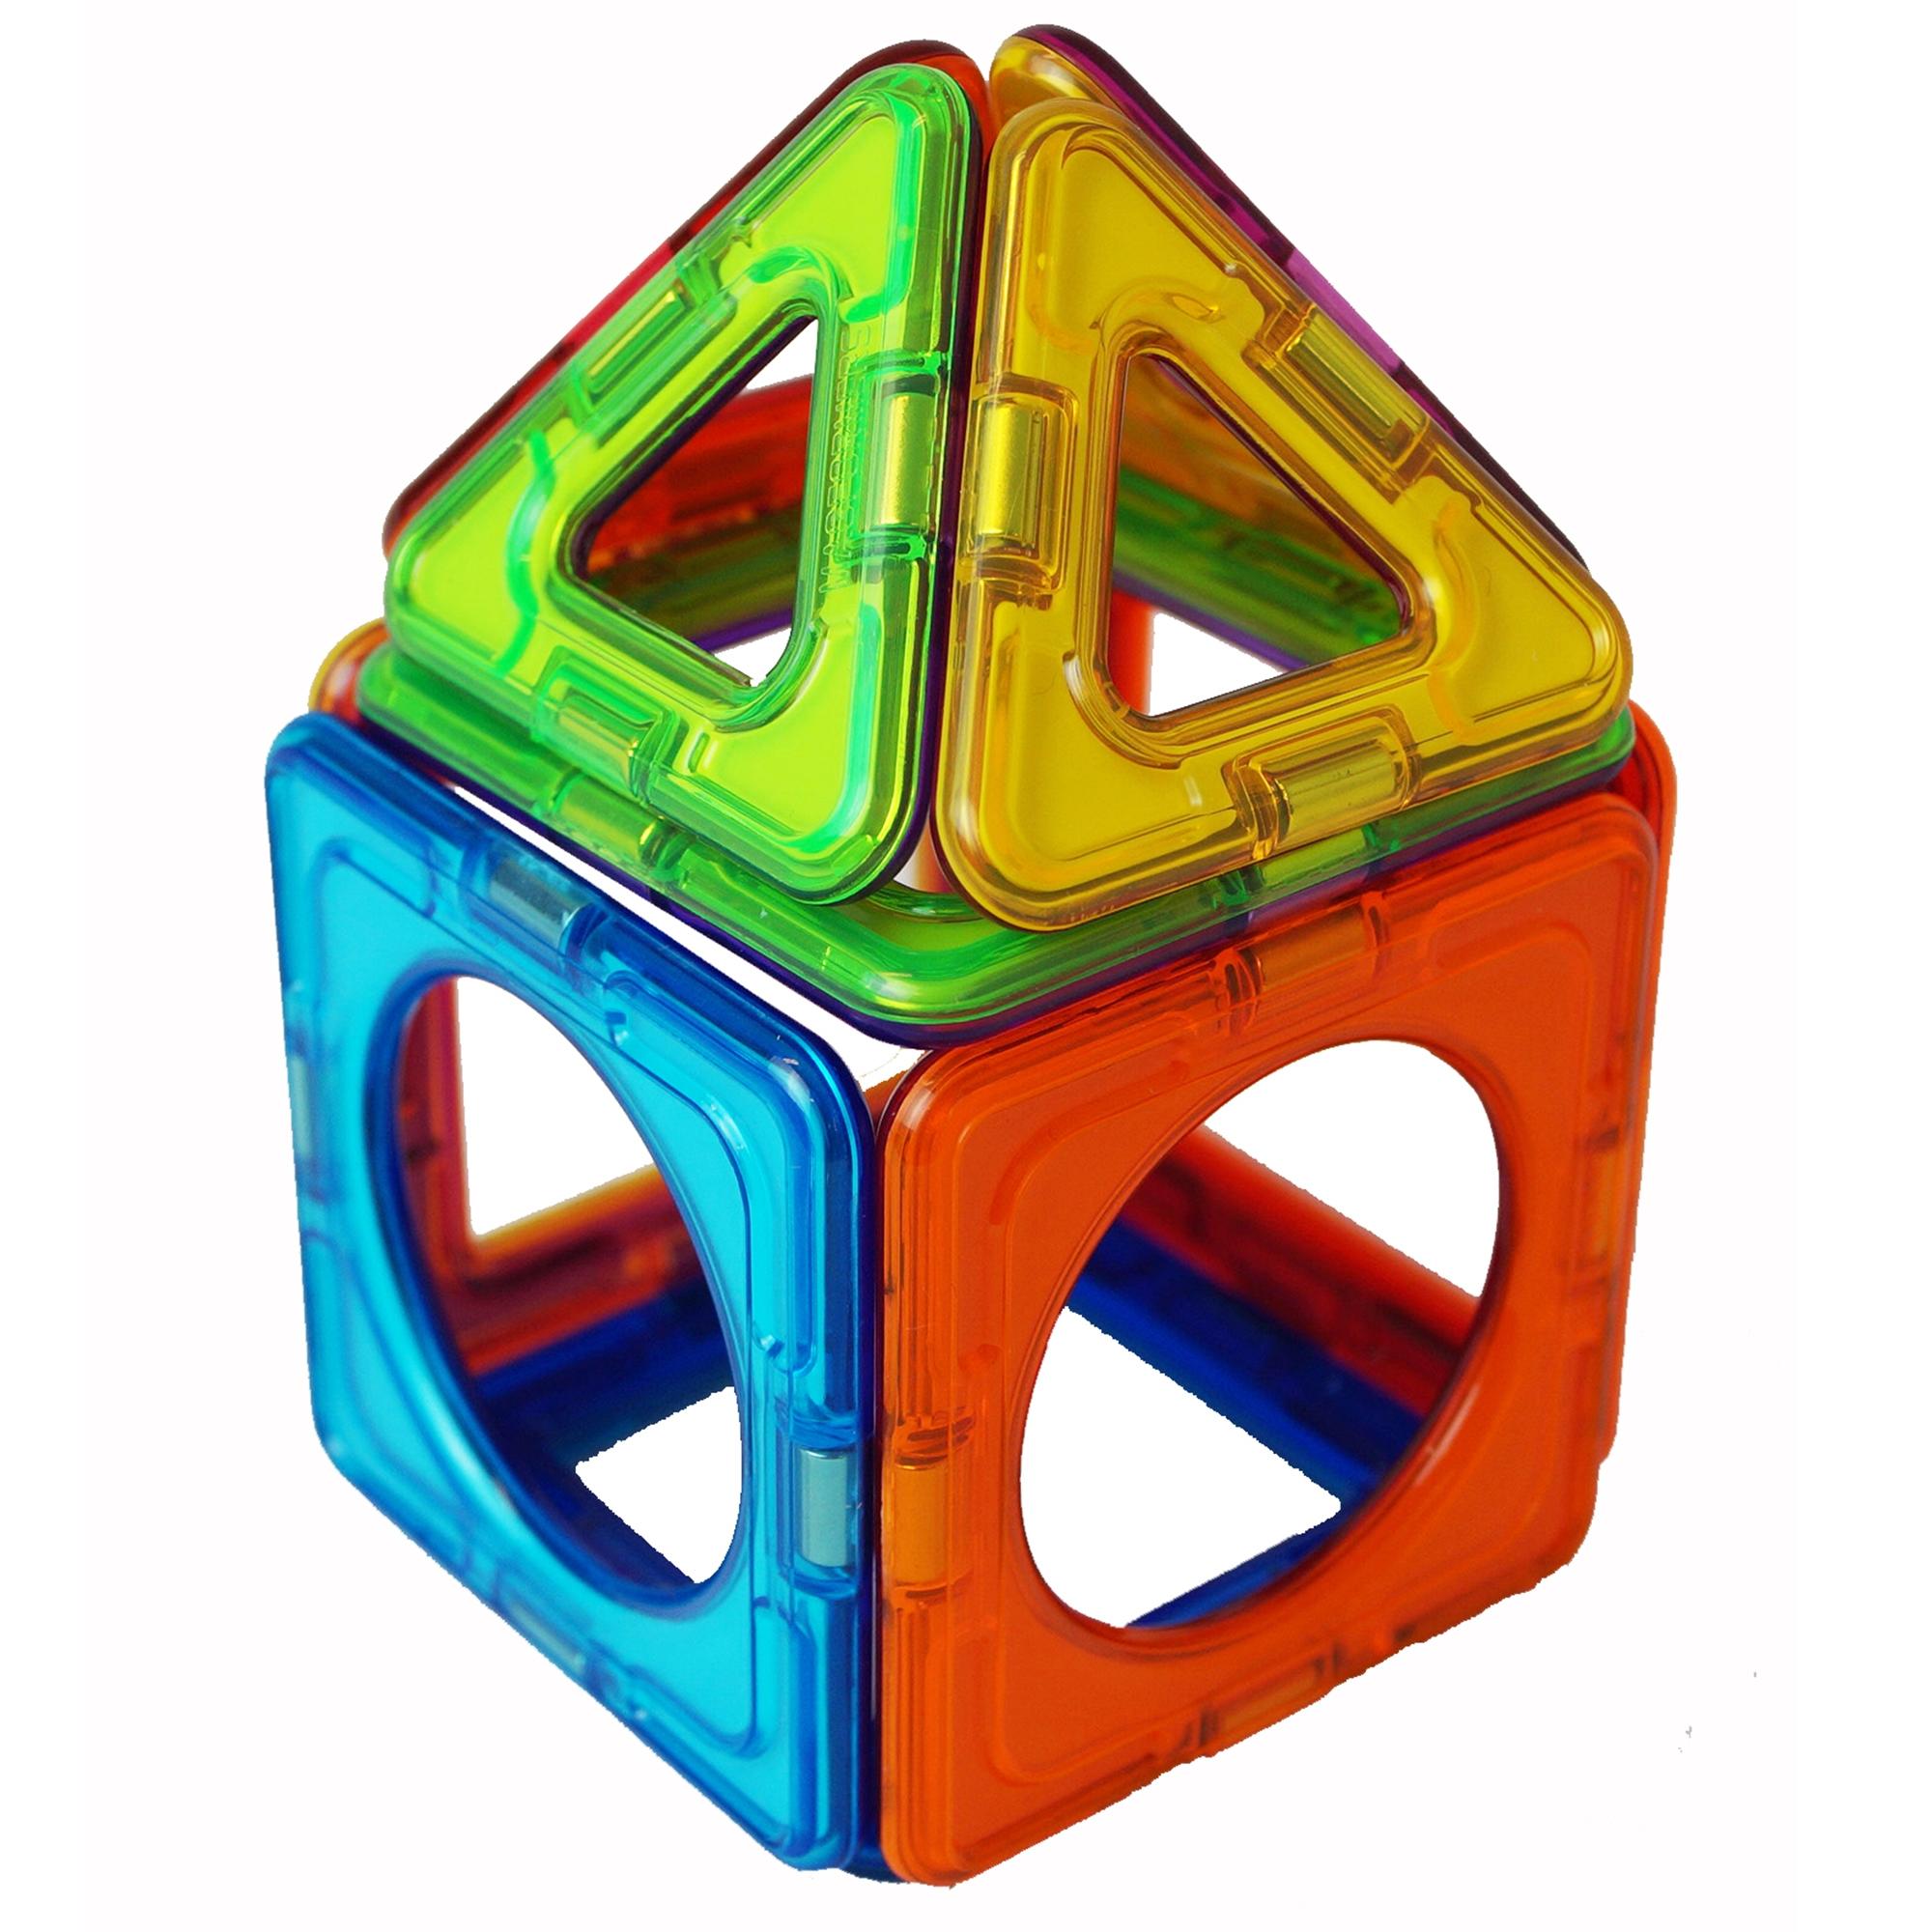 Colourful shape made from Magformers pieces